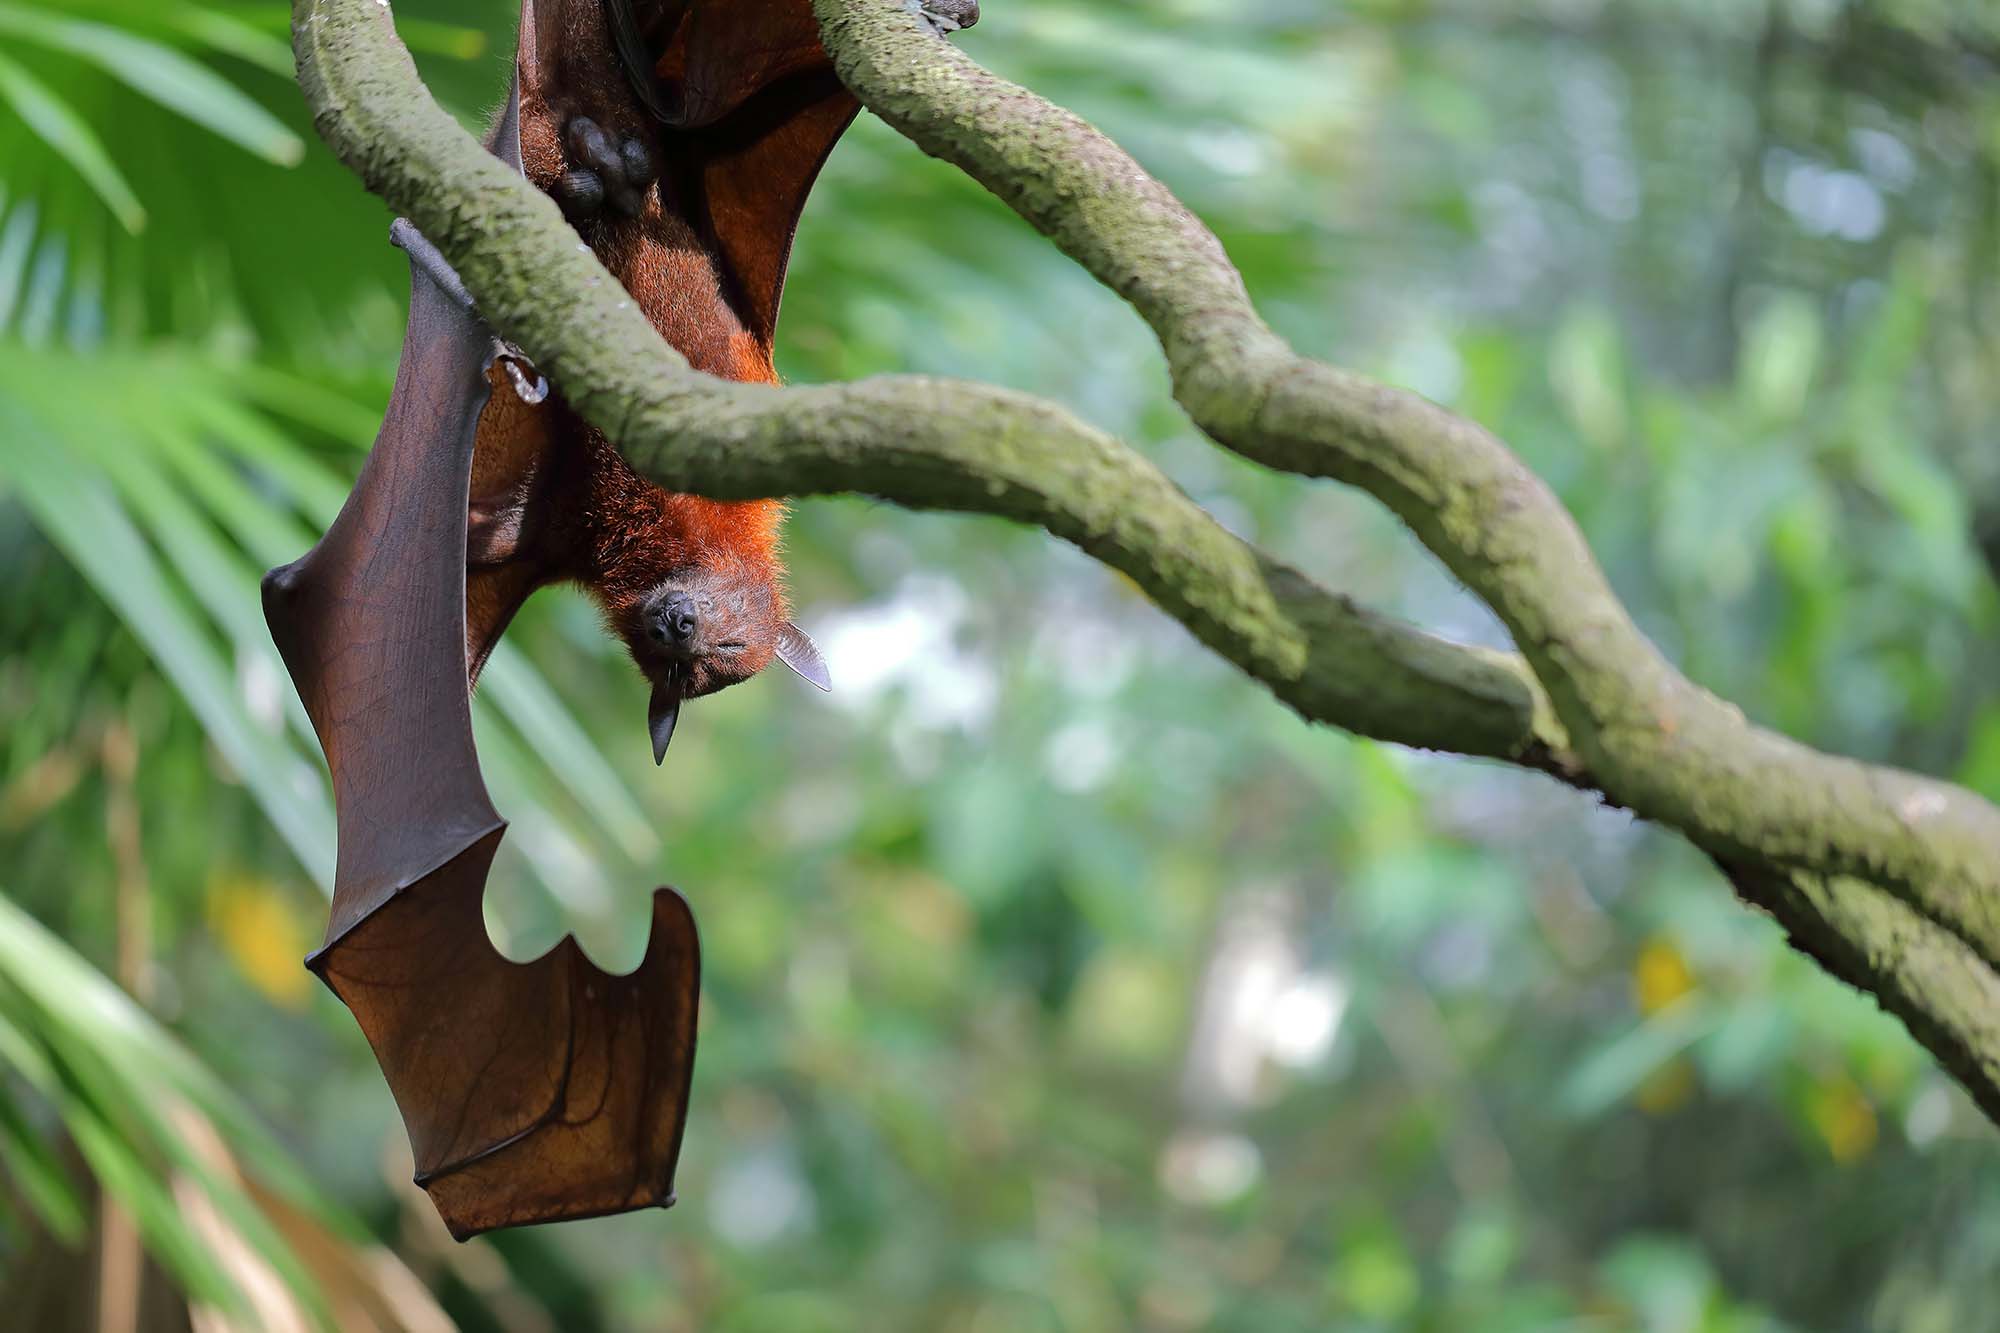 A reddish bat hanging with eyes closed on a tree branch, with its wing extended